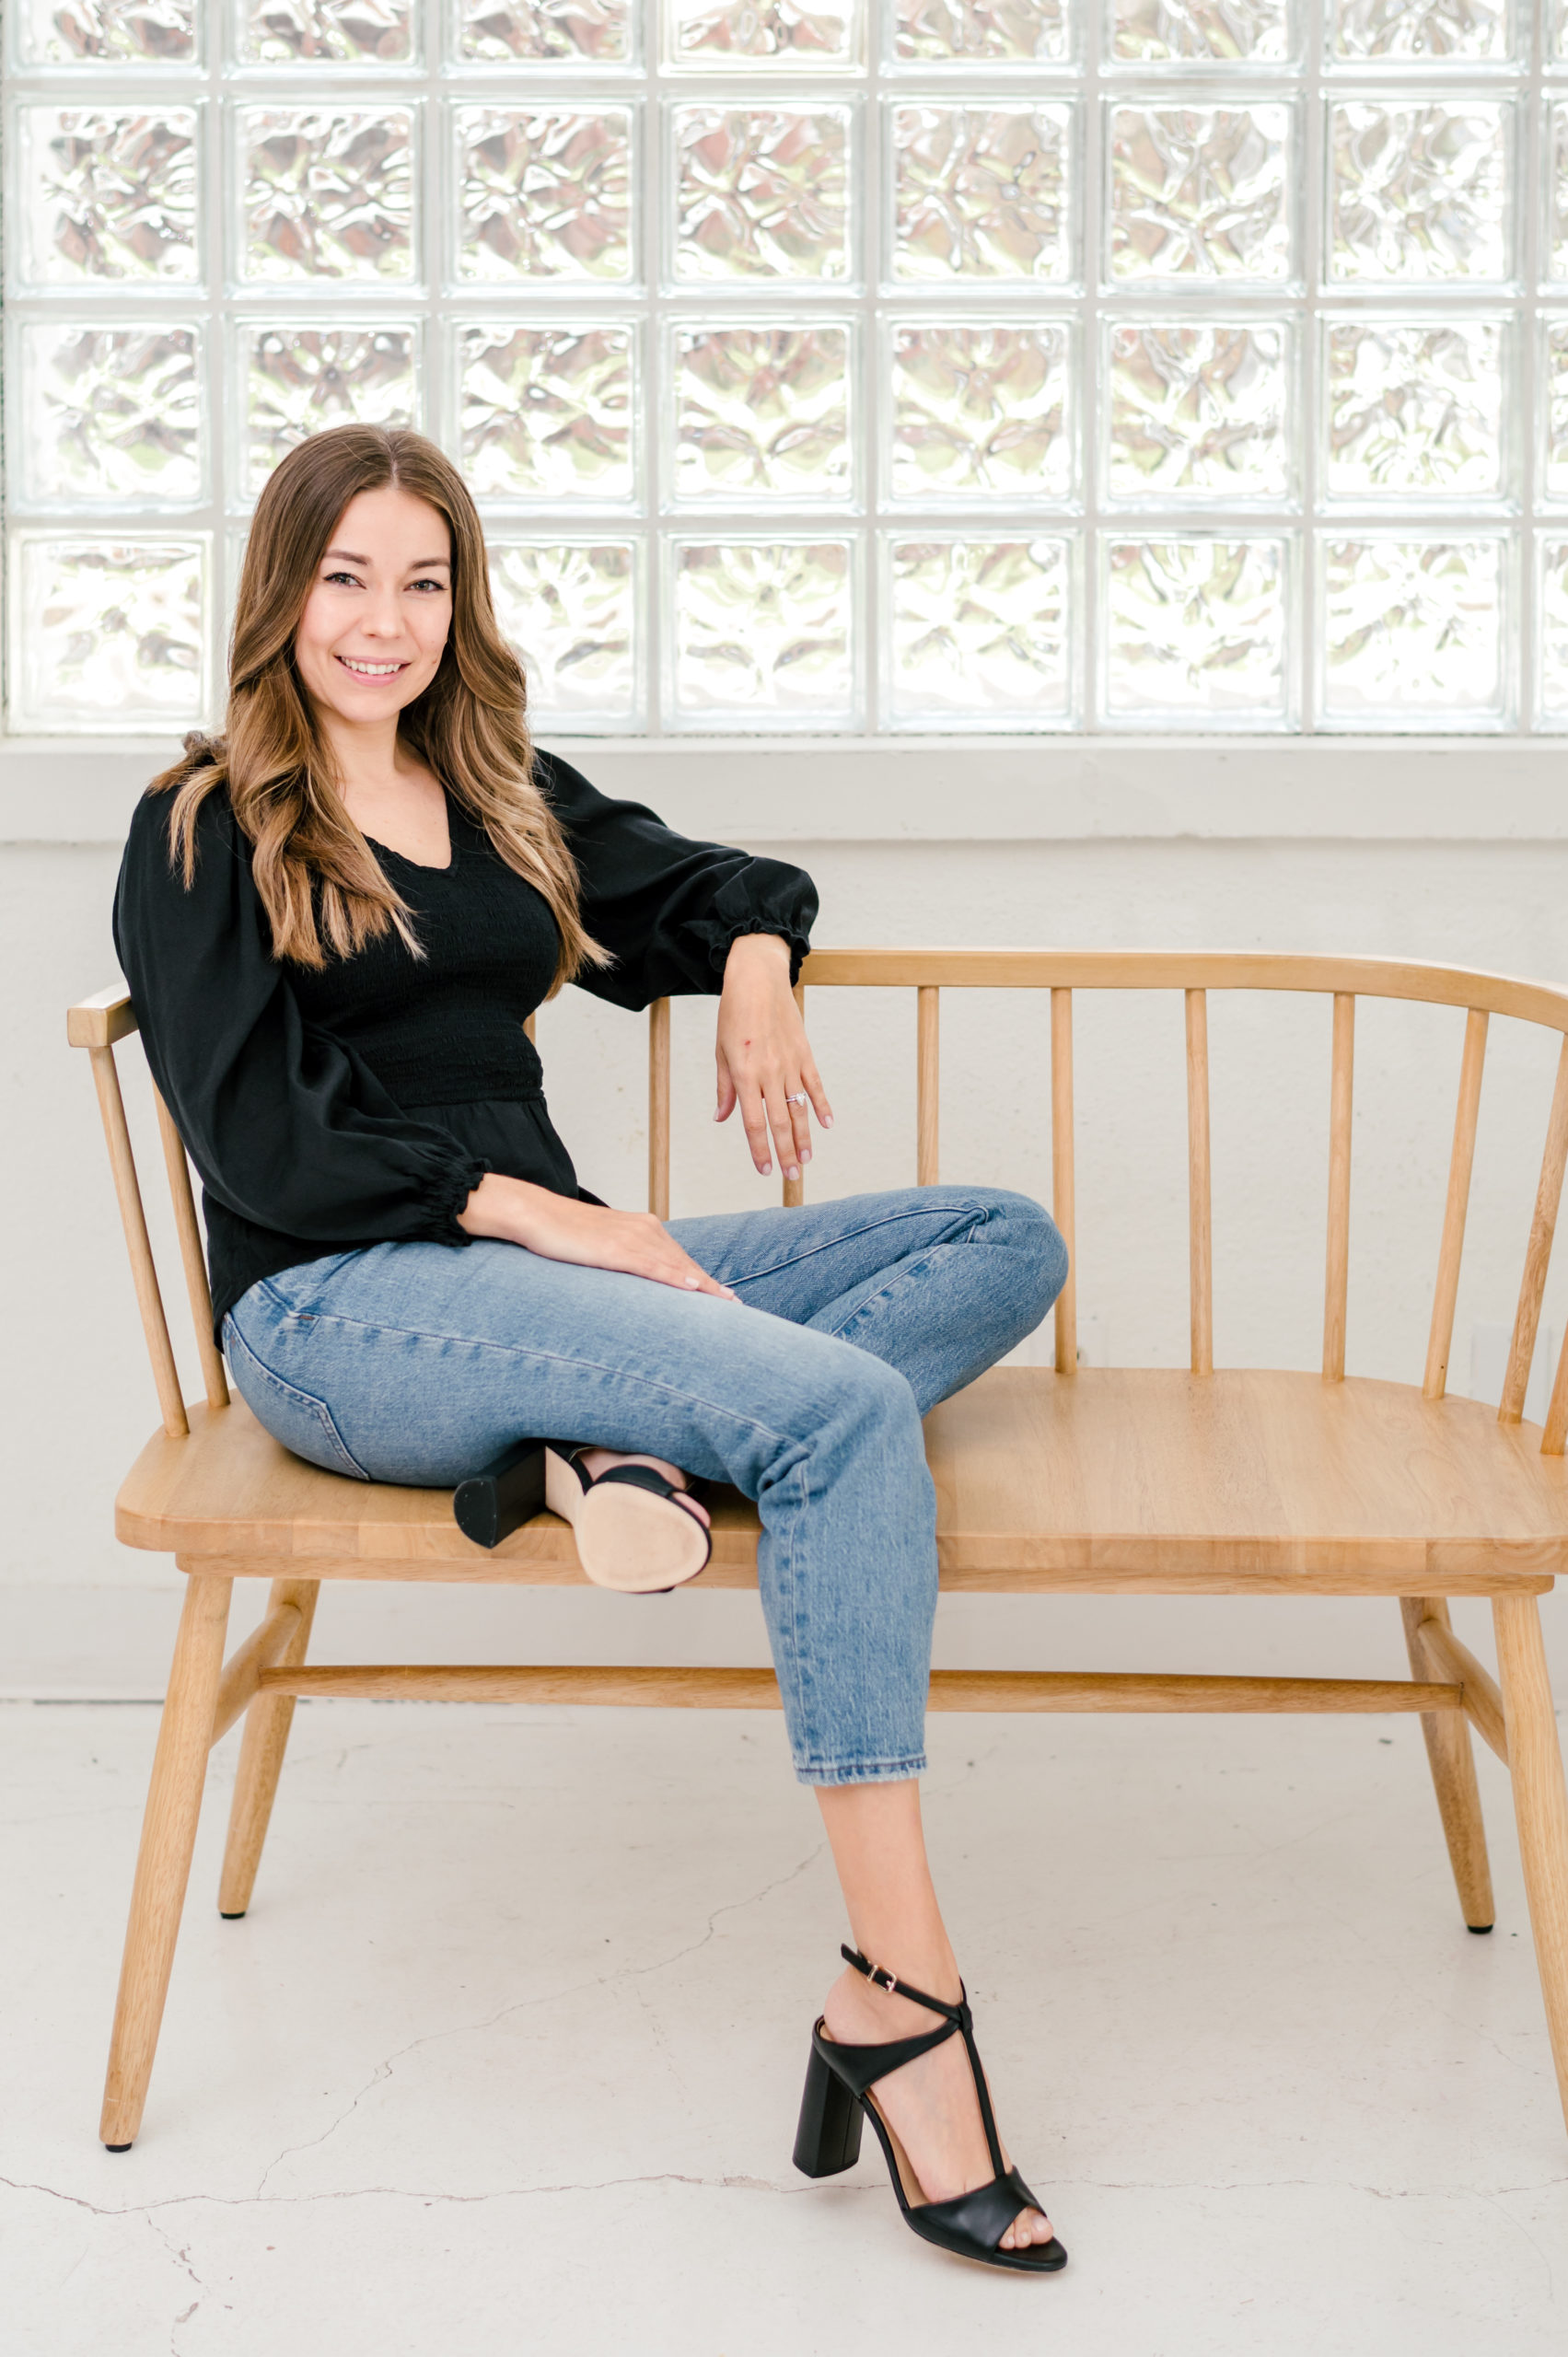 Woman sitting on wooden bench smiling in a white blouse and jeans for her brand photography photos